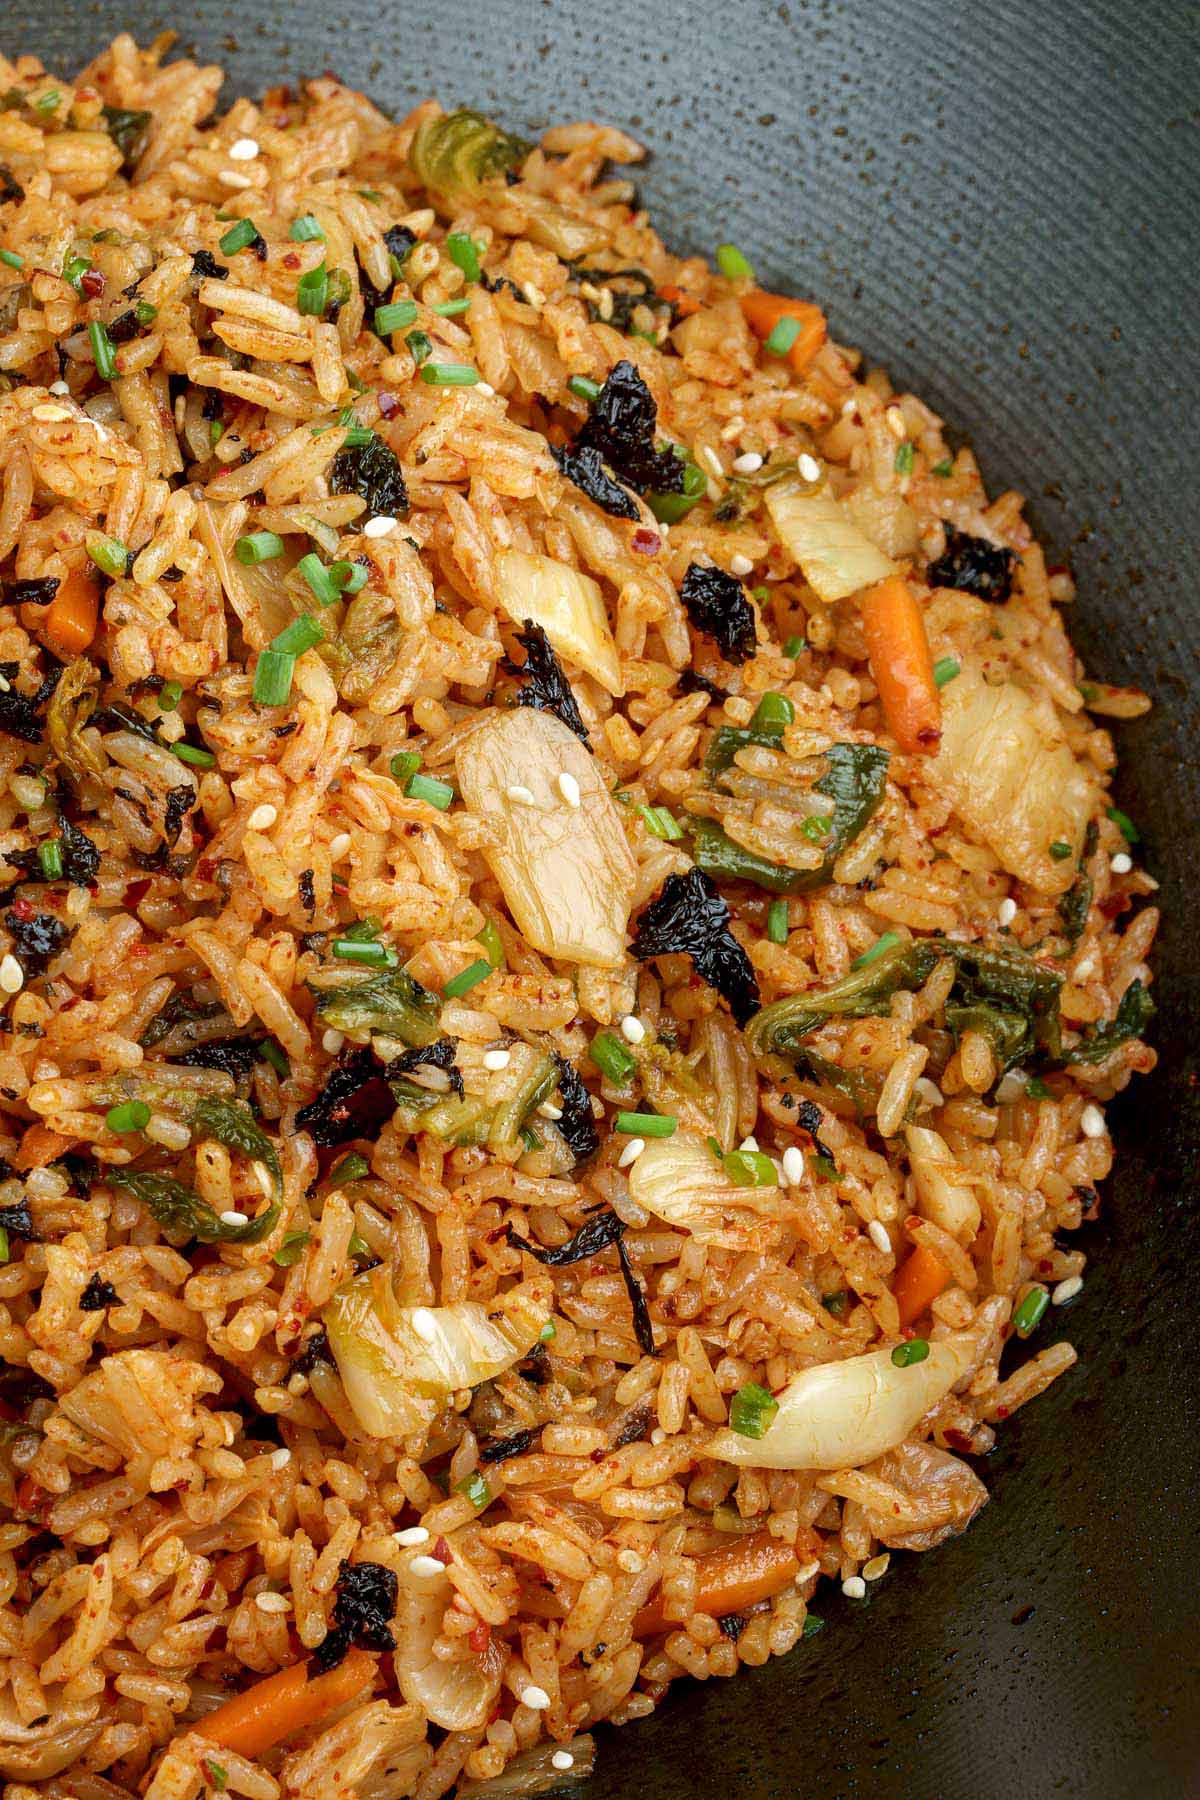 Flavorful kimchi fried rice made with gochujang, sesame oil, and Furikake.